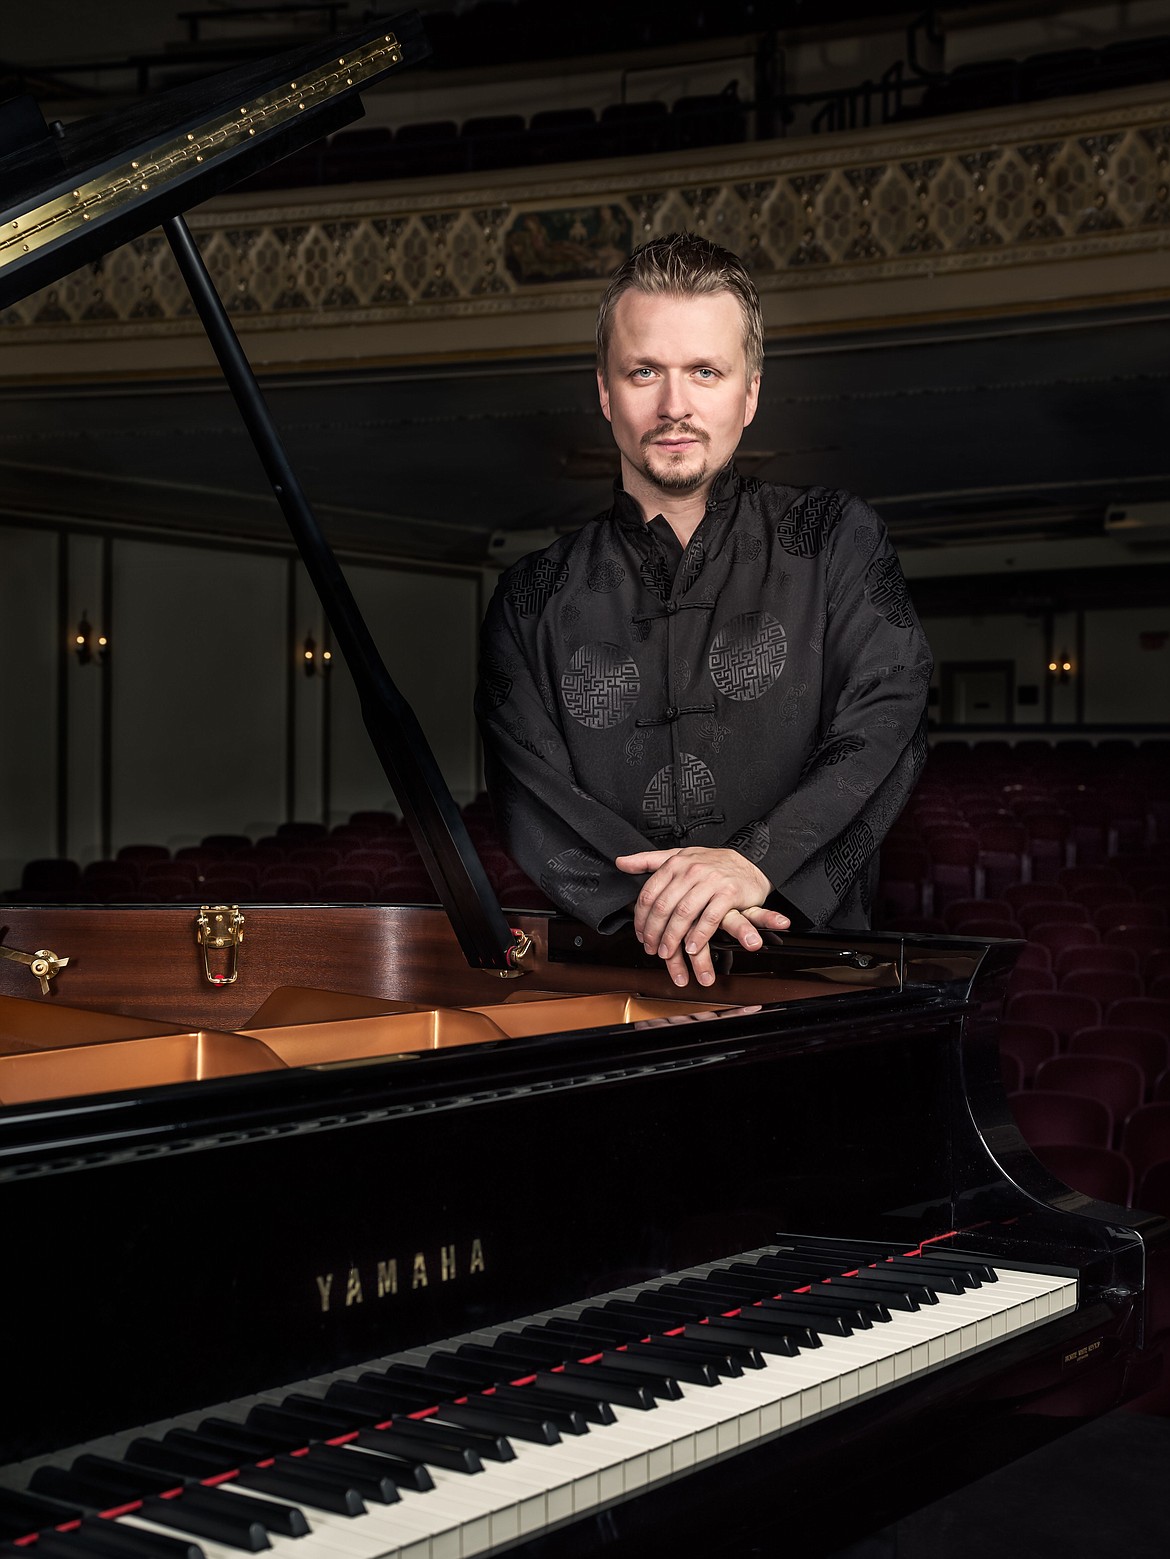 Acclaimed Russian pianist Ilya Yakushev stops in Kalispell during his tri-continental tour to perform Rachmaninoff's Piano Concerto No. 2 in C at the Wachholz College Center Saturday and Sunday in recognition of the 150th anniversary of Rachmaninoff’s birth. (Photo provided)